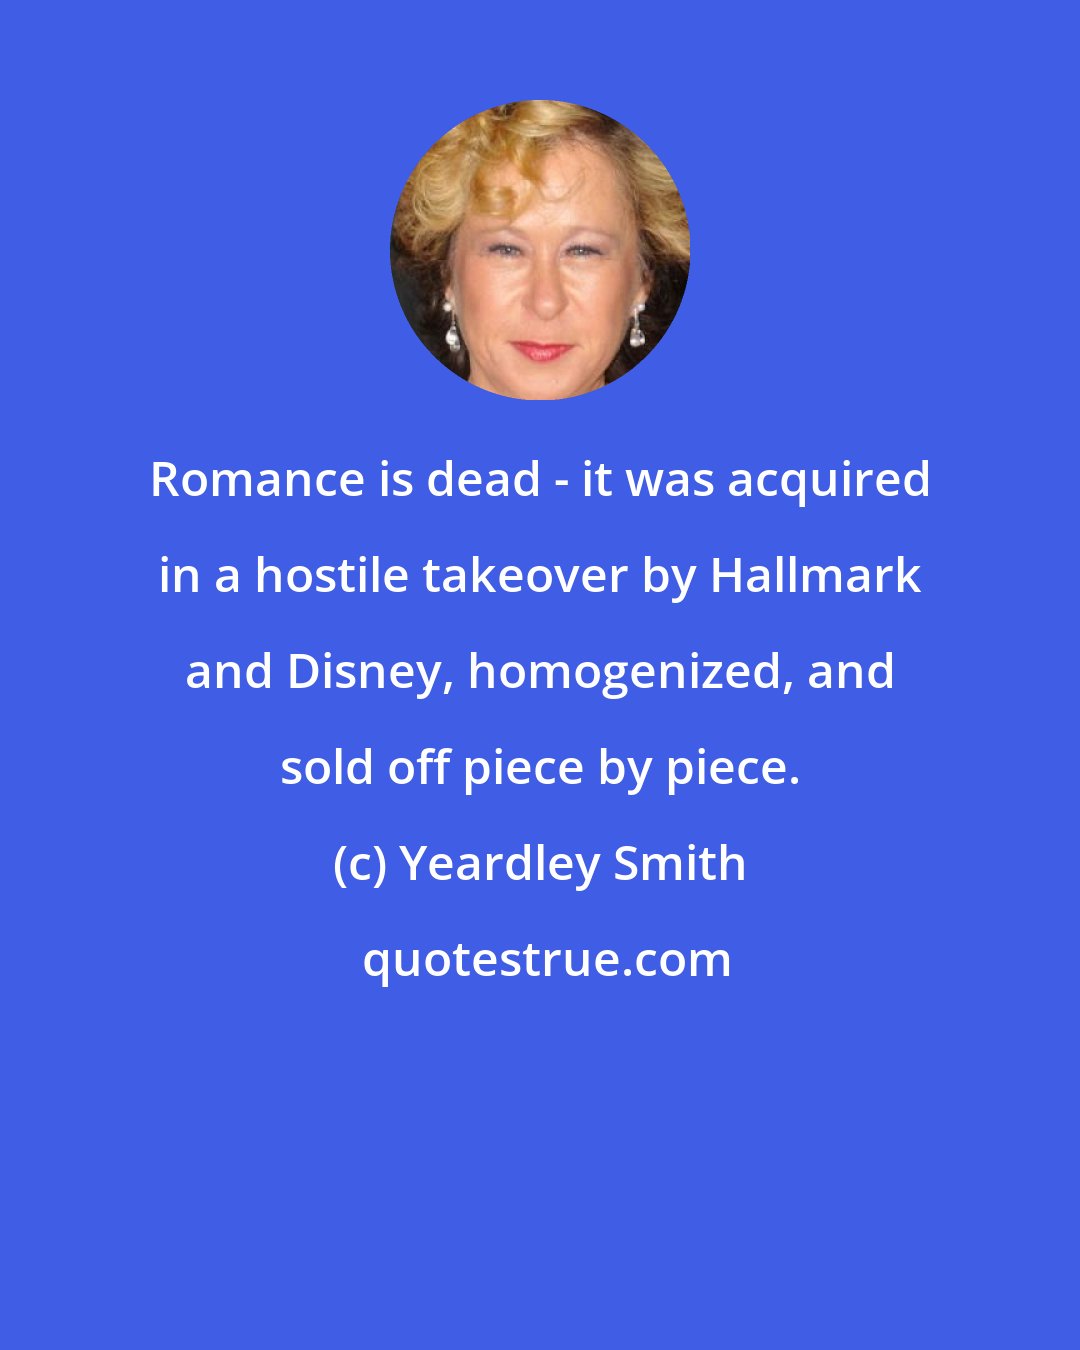 Yeardley Smith: Romance is dead - it was acquired in a hostile takeover by Hallmark and Disney, homogenized, and sold off piece by piece.